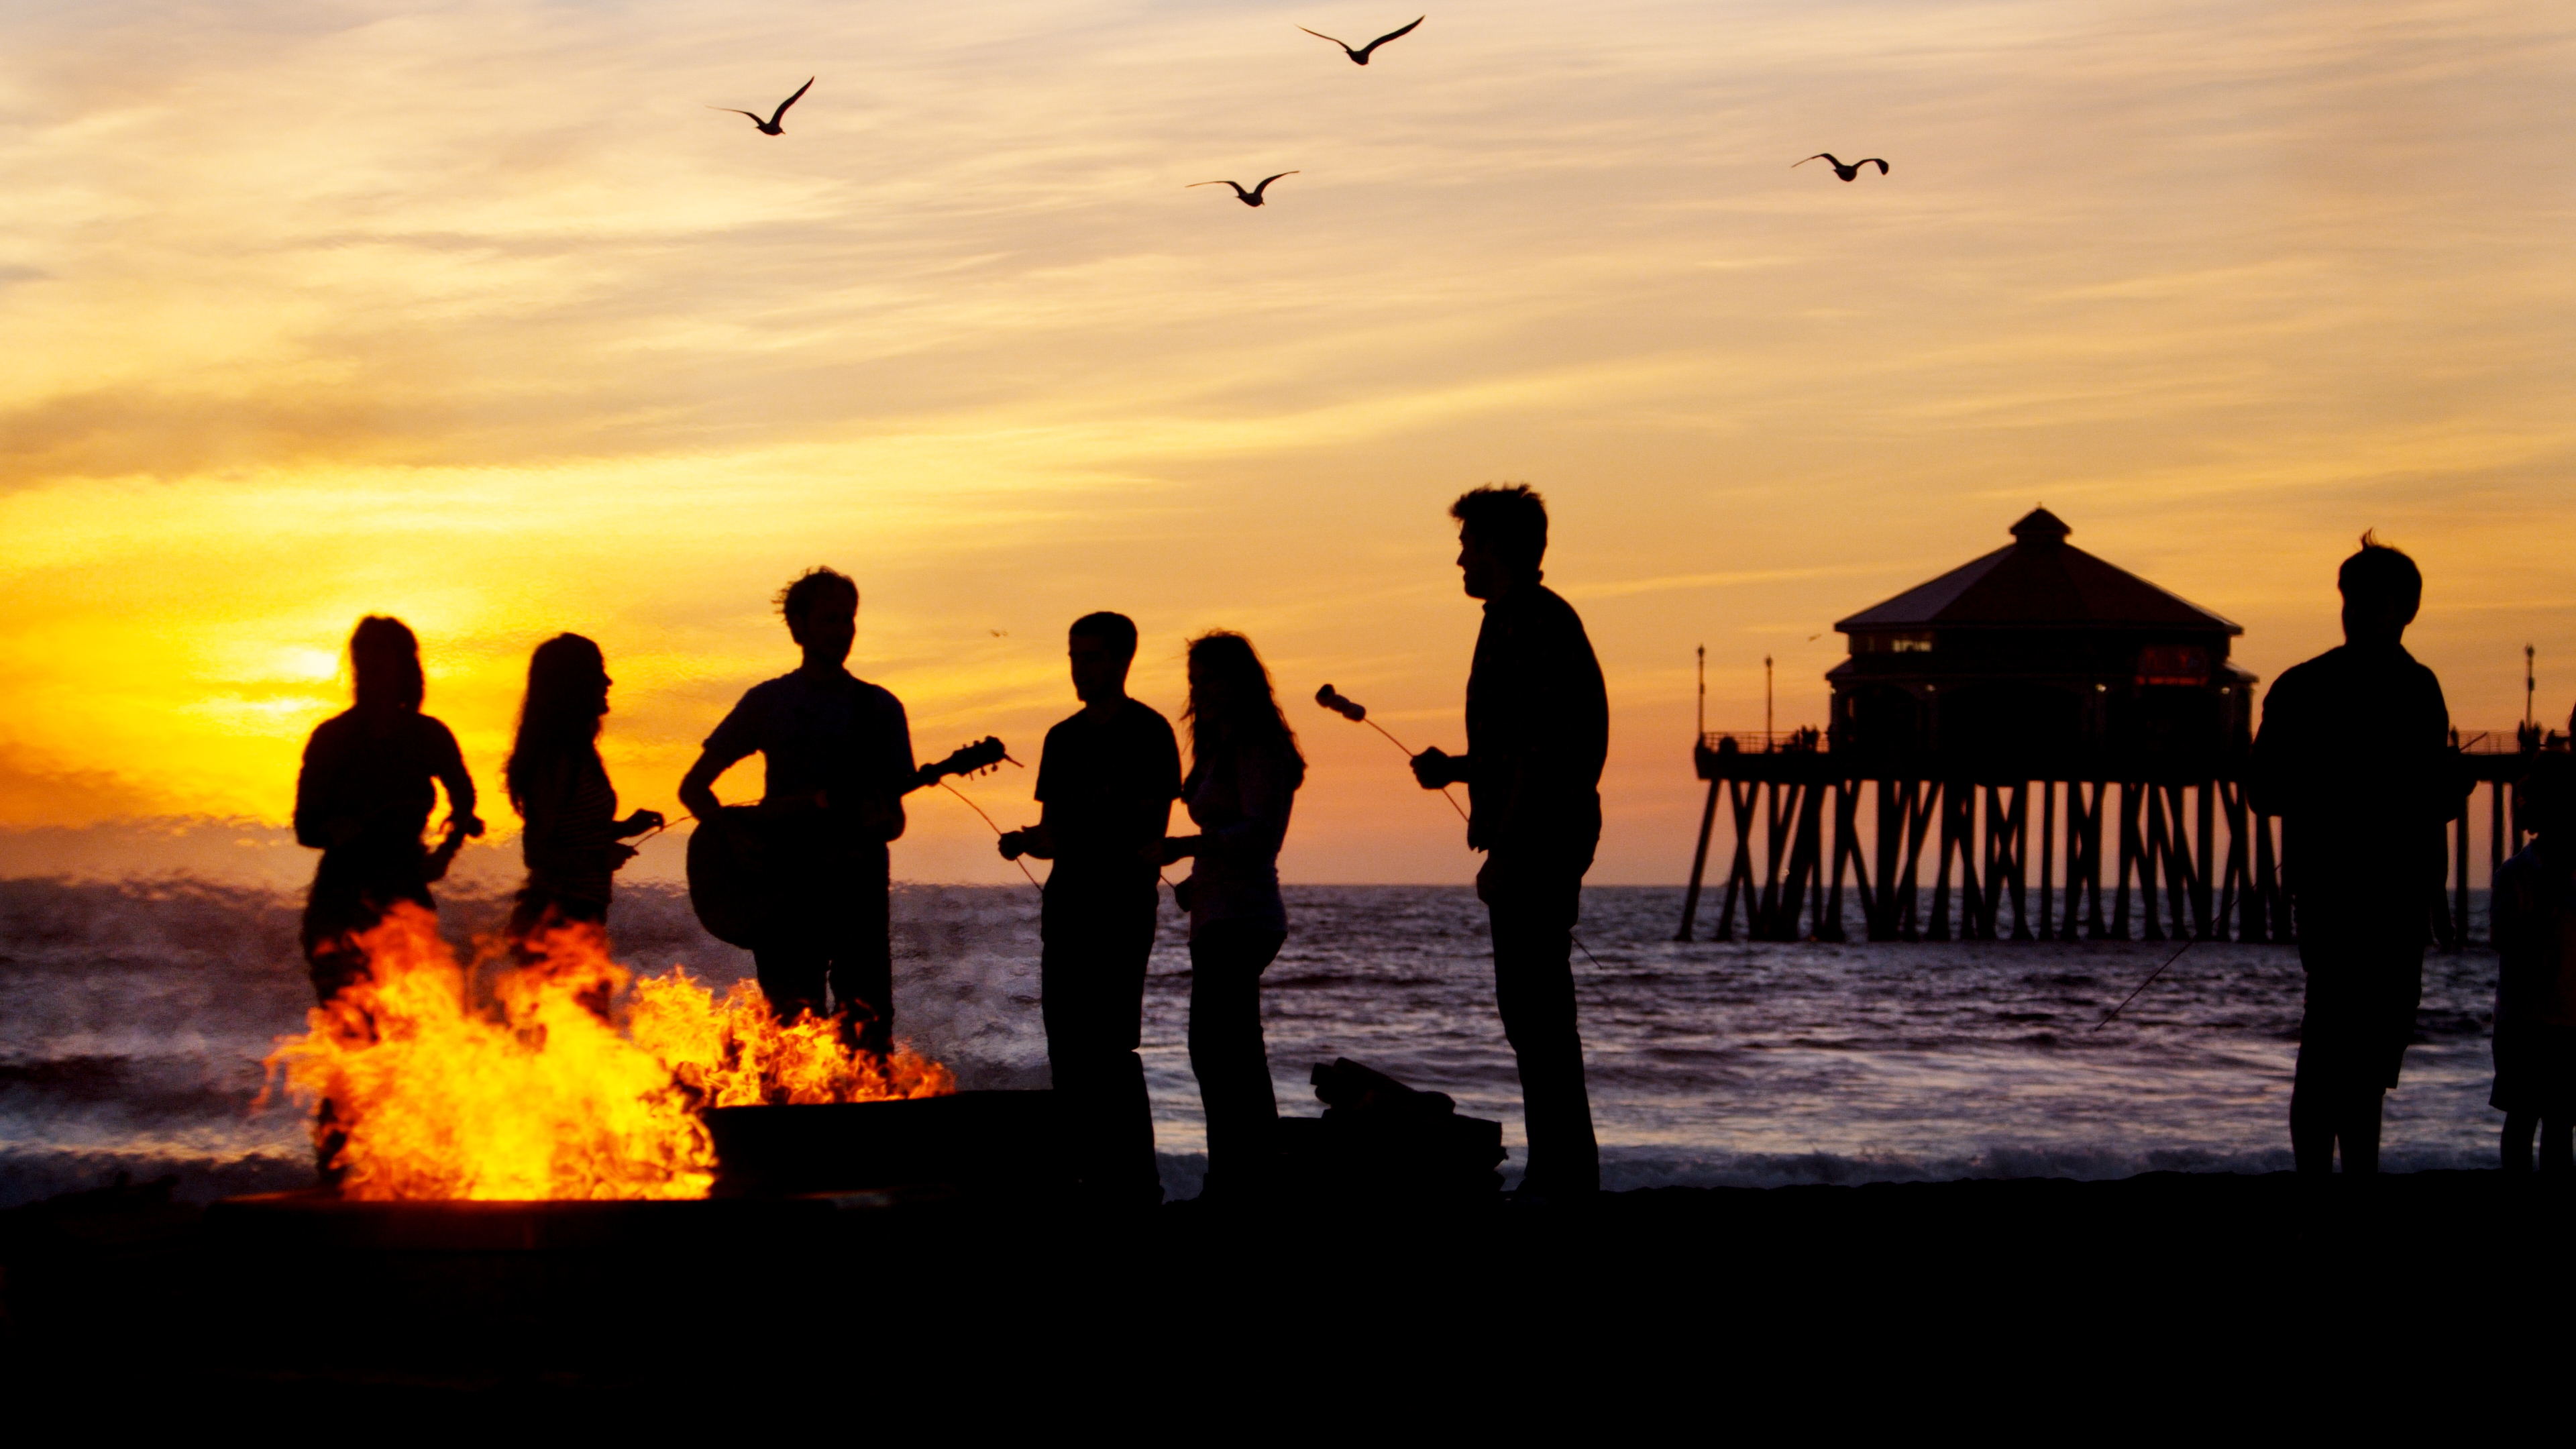 Friends on the beach at sunset playing music and roasting marshmallows by a bonfire in Huntington Beach 